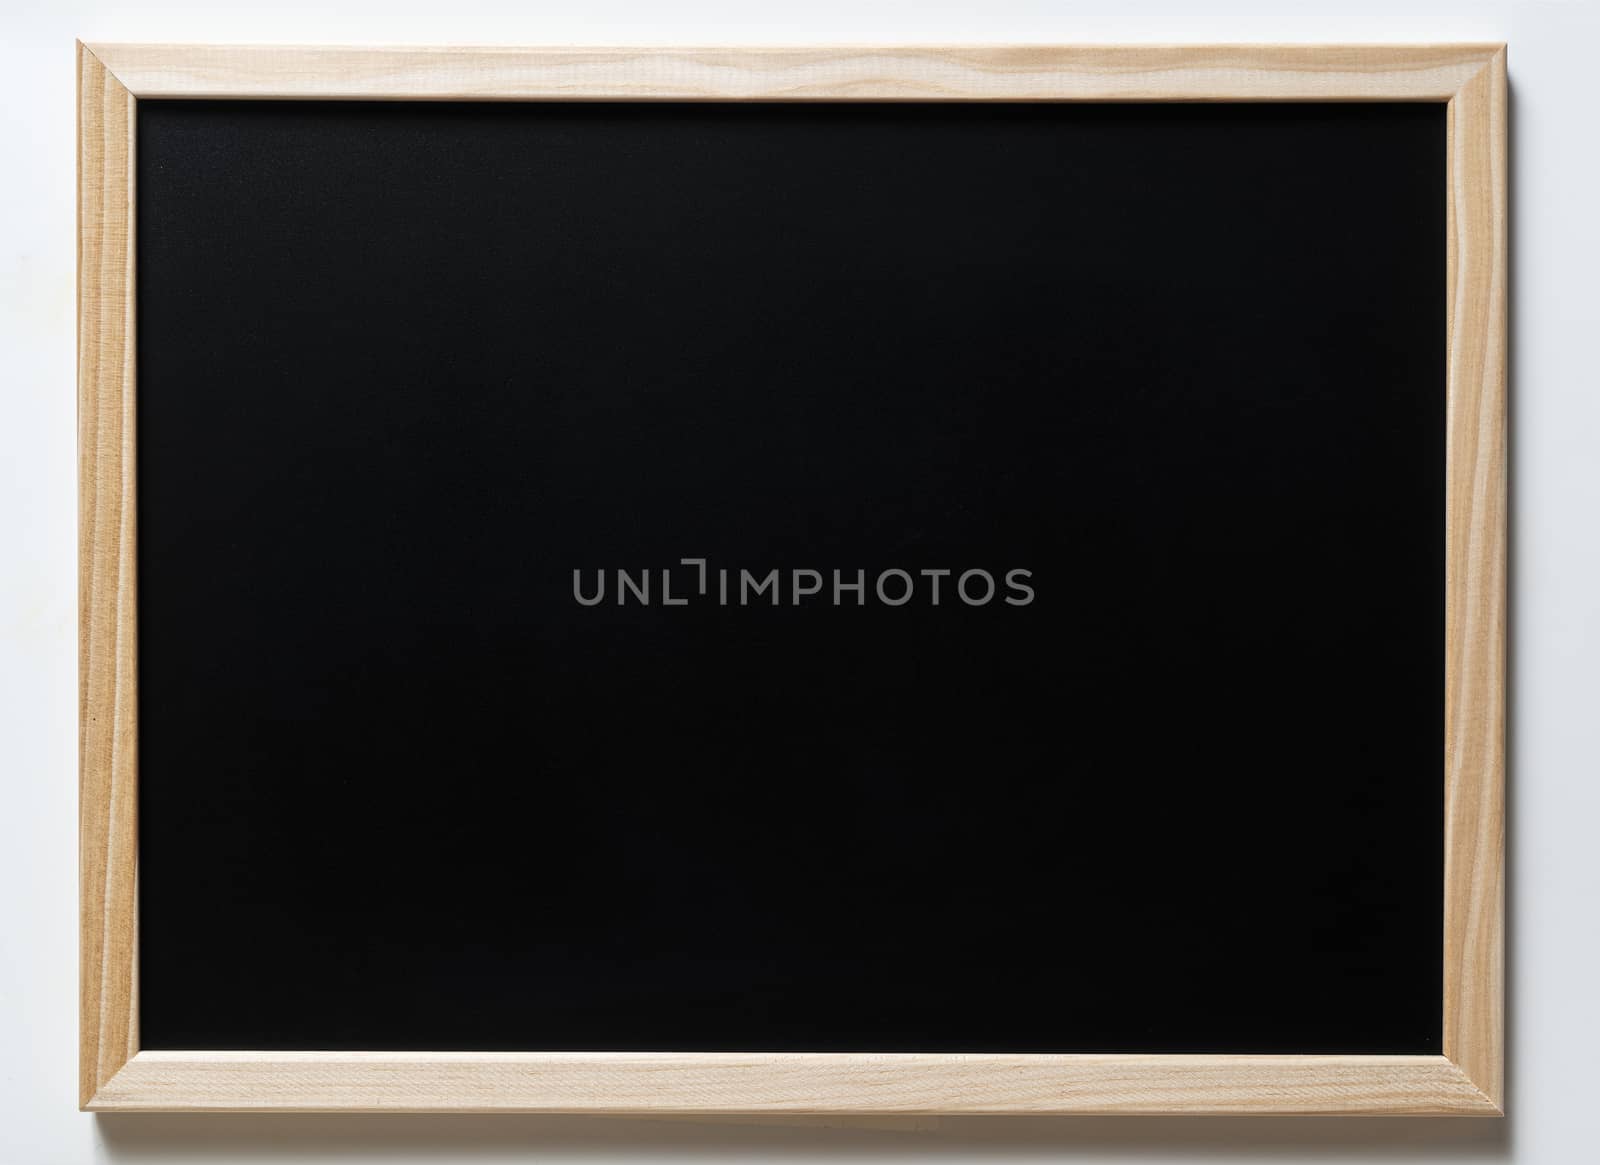 a blackboard with written anything